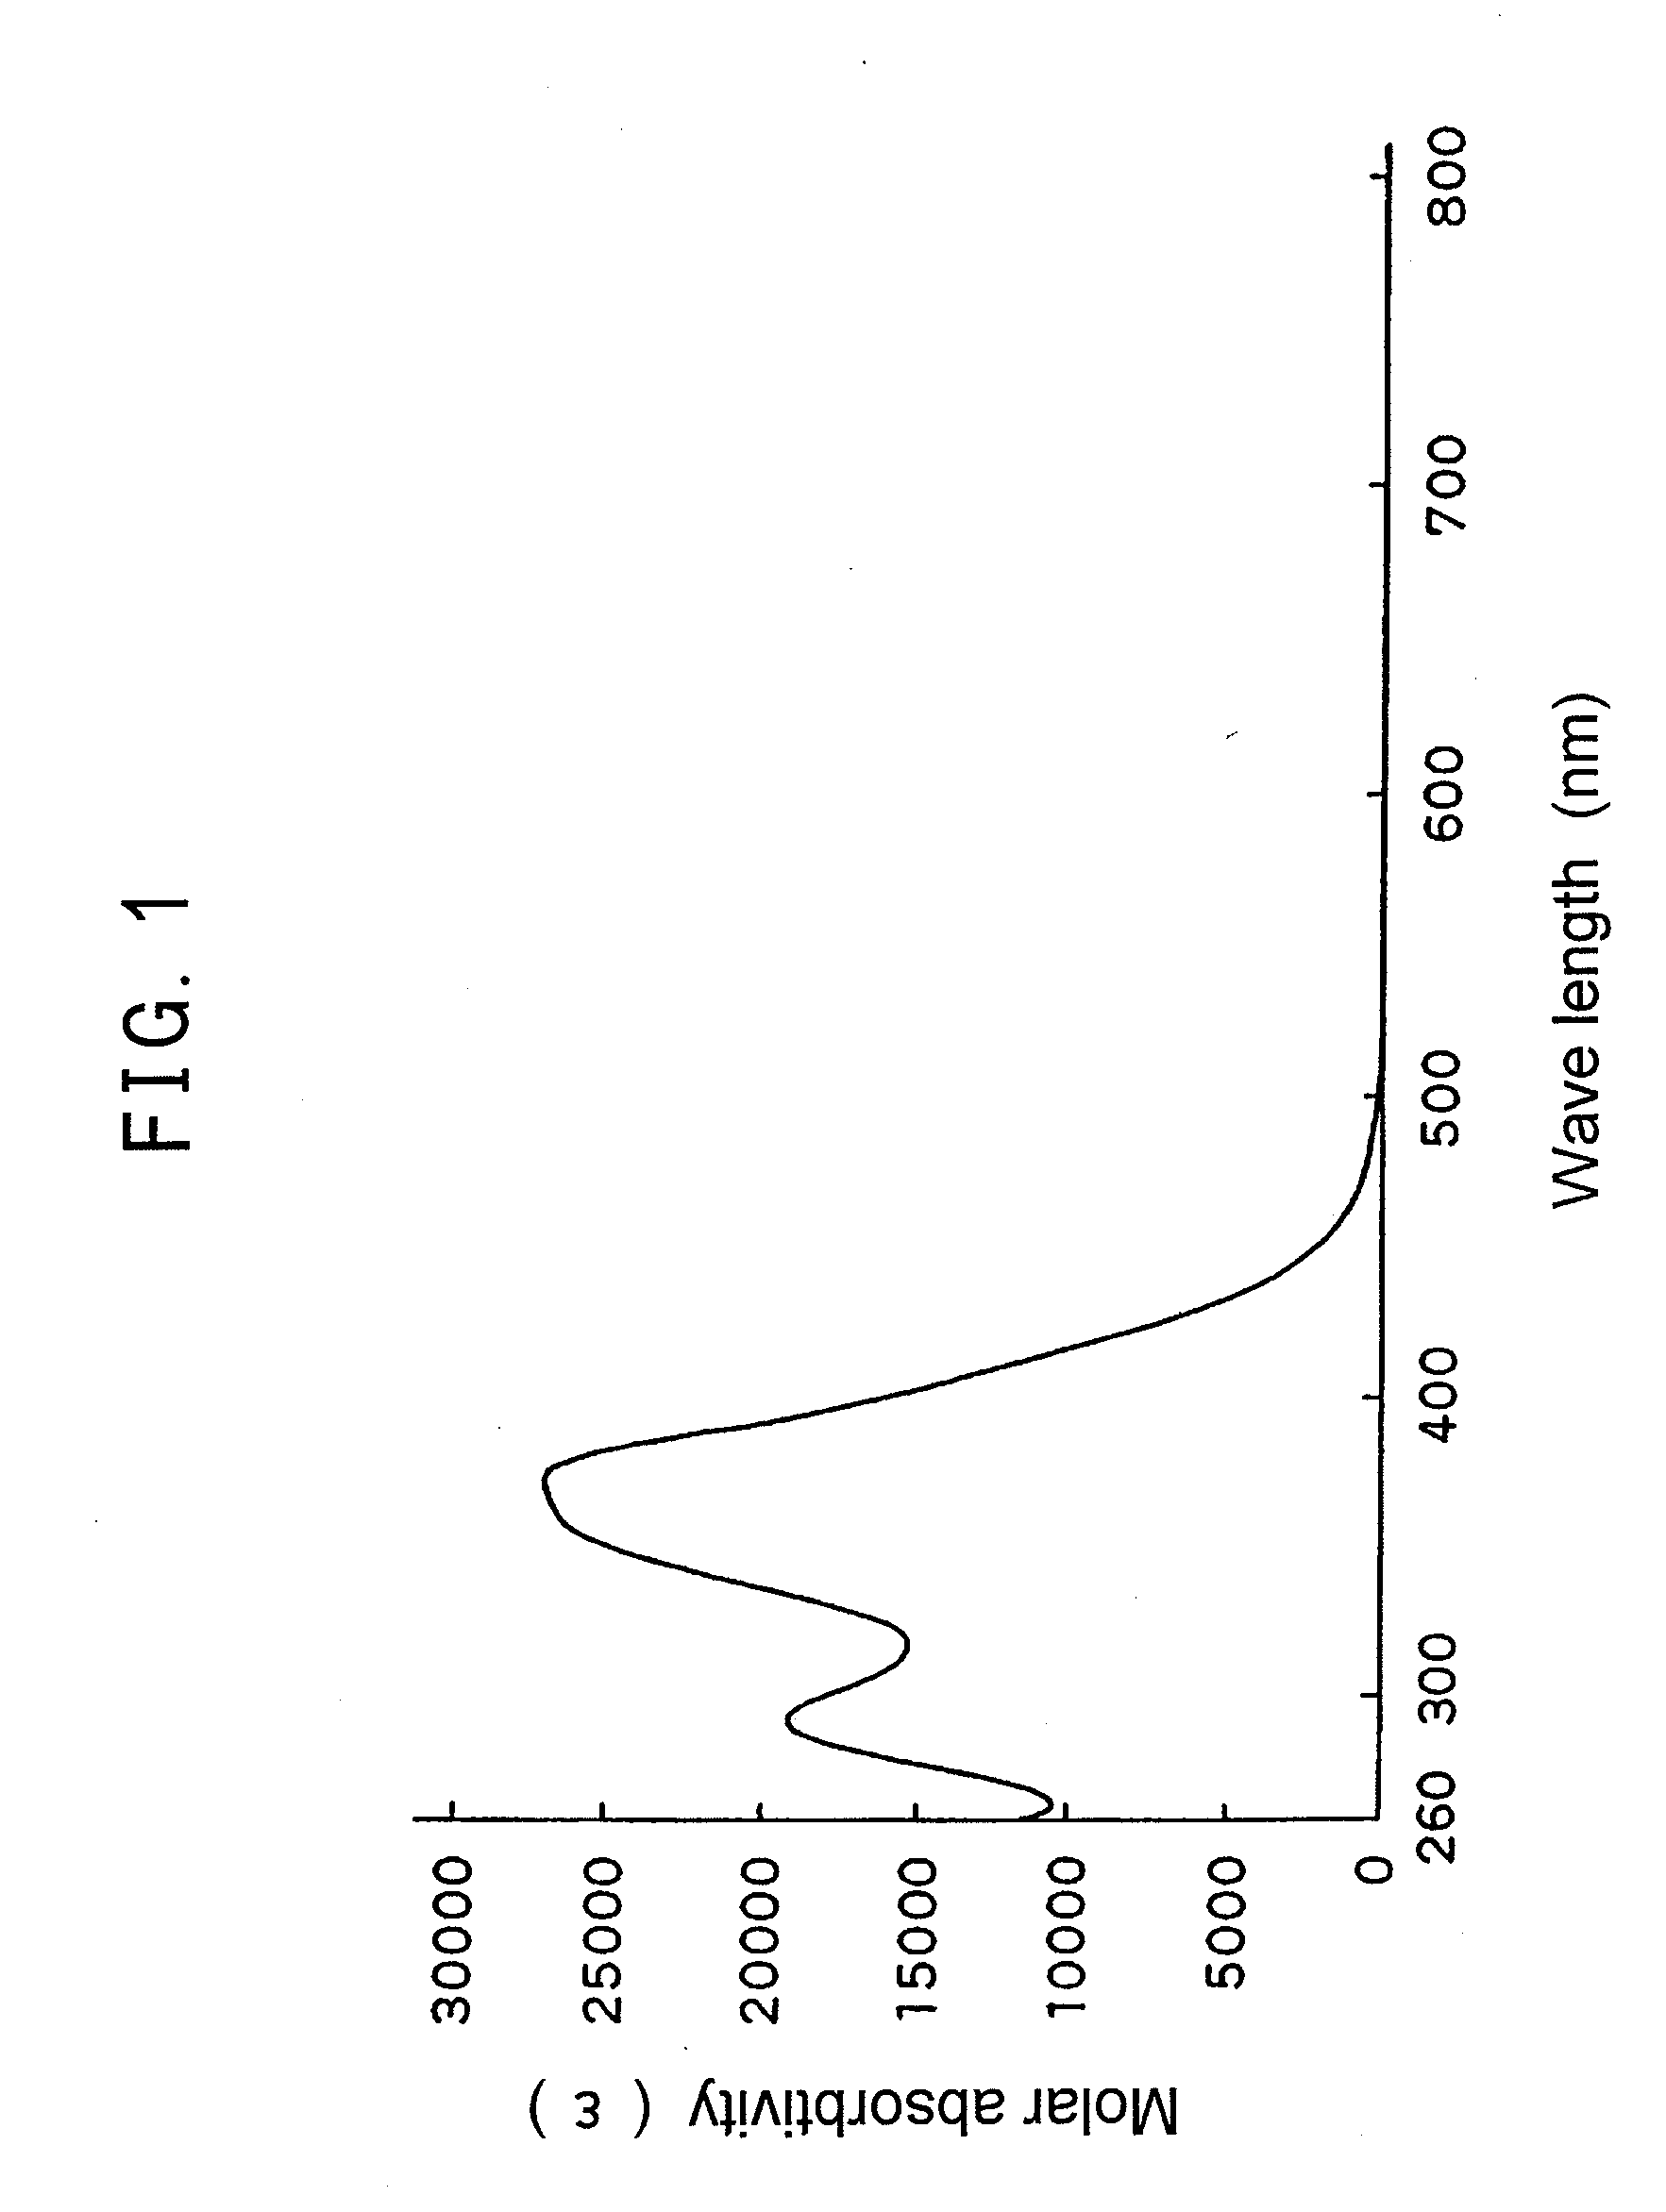 Novel Polymerizable Dye and Ophthalmic Lens Containing the Same